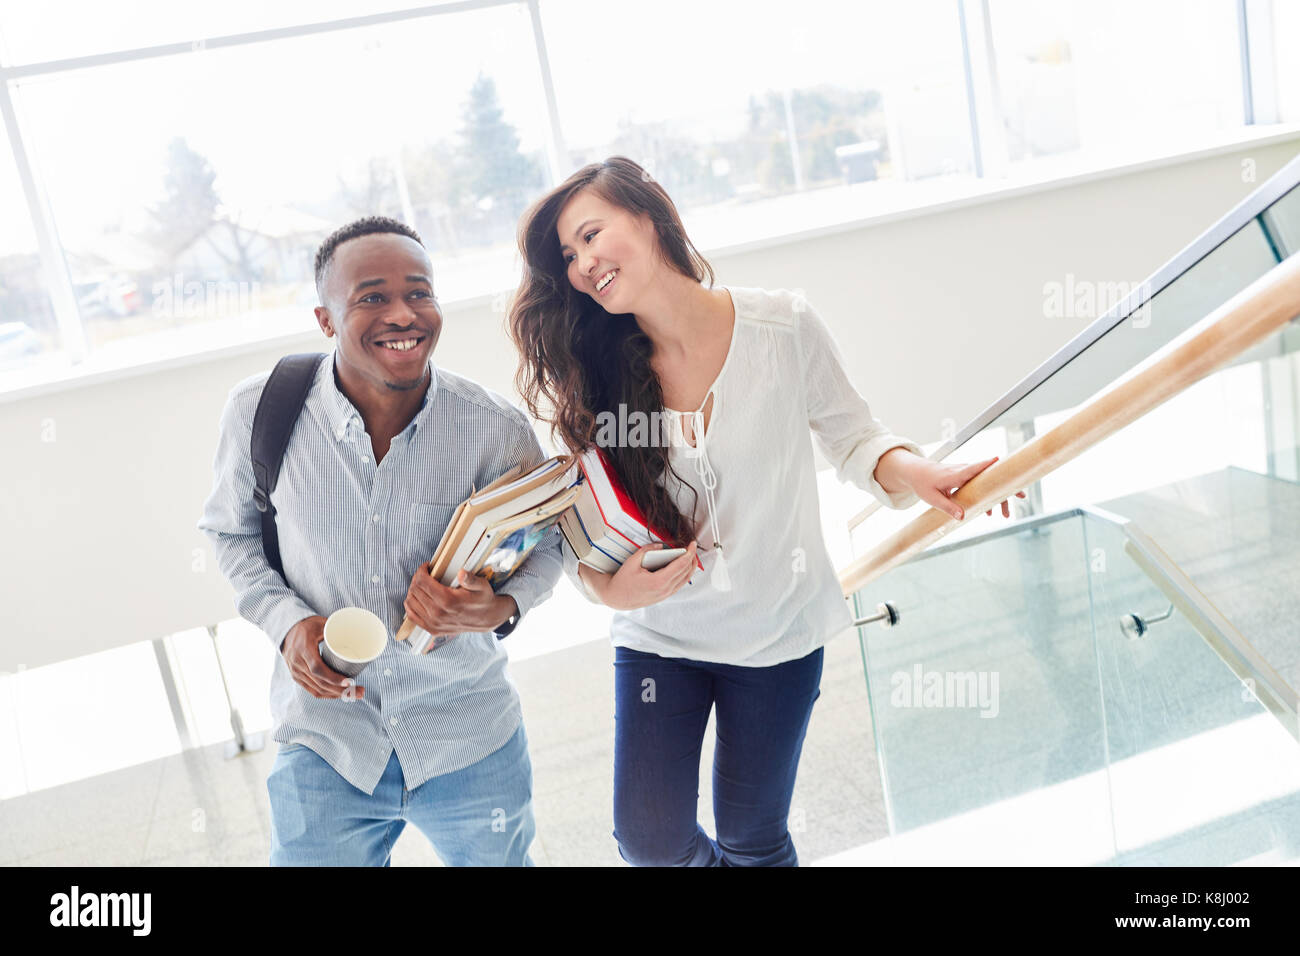 Interracial students as a couple flirt happy in school Stock Photo